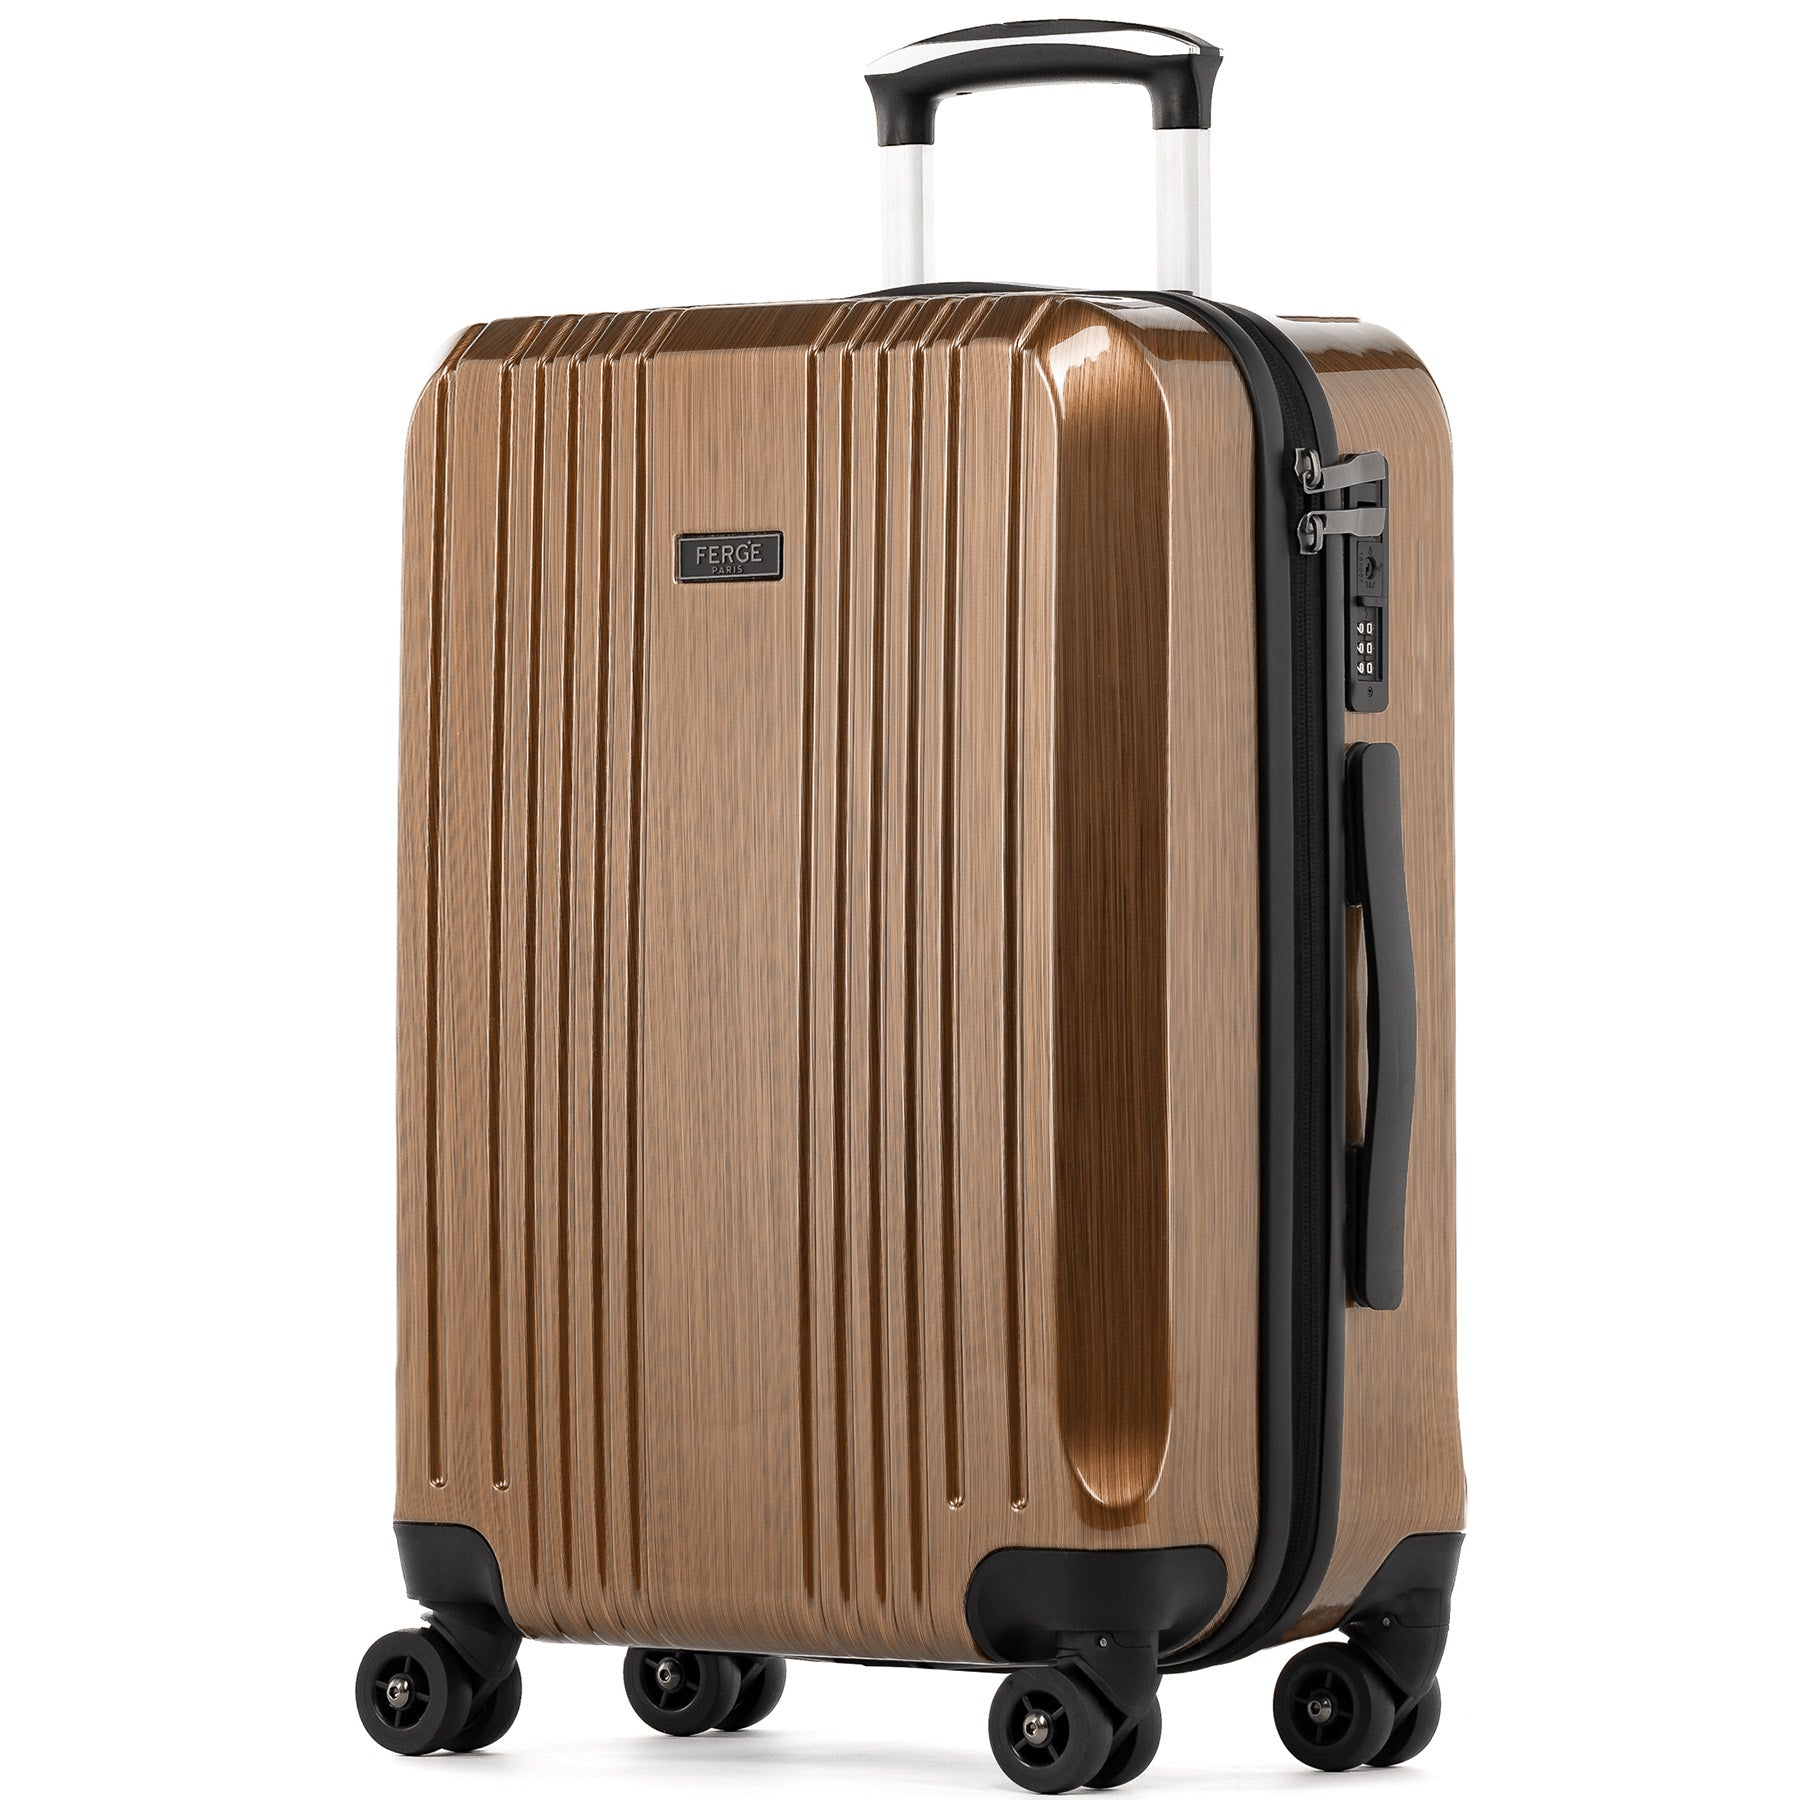 Hand luggage suitcase CANNES ABS & PC